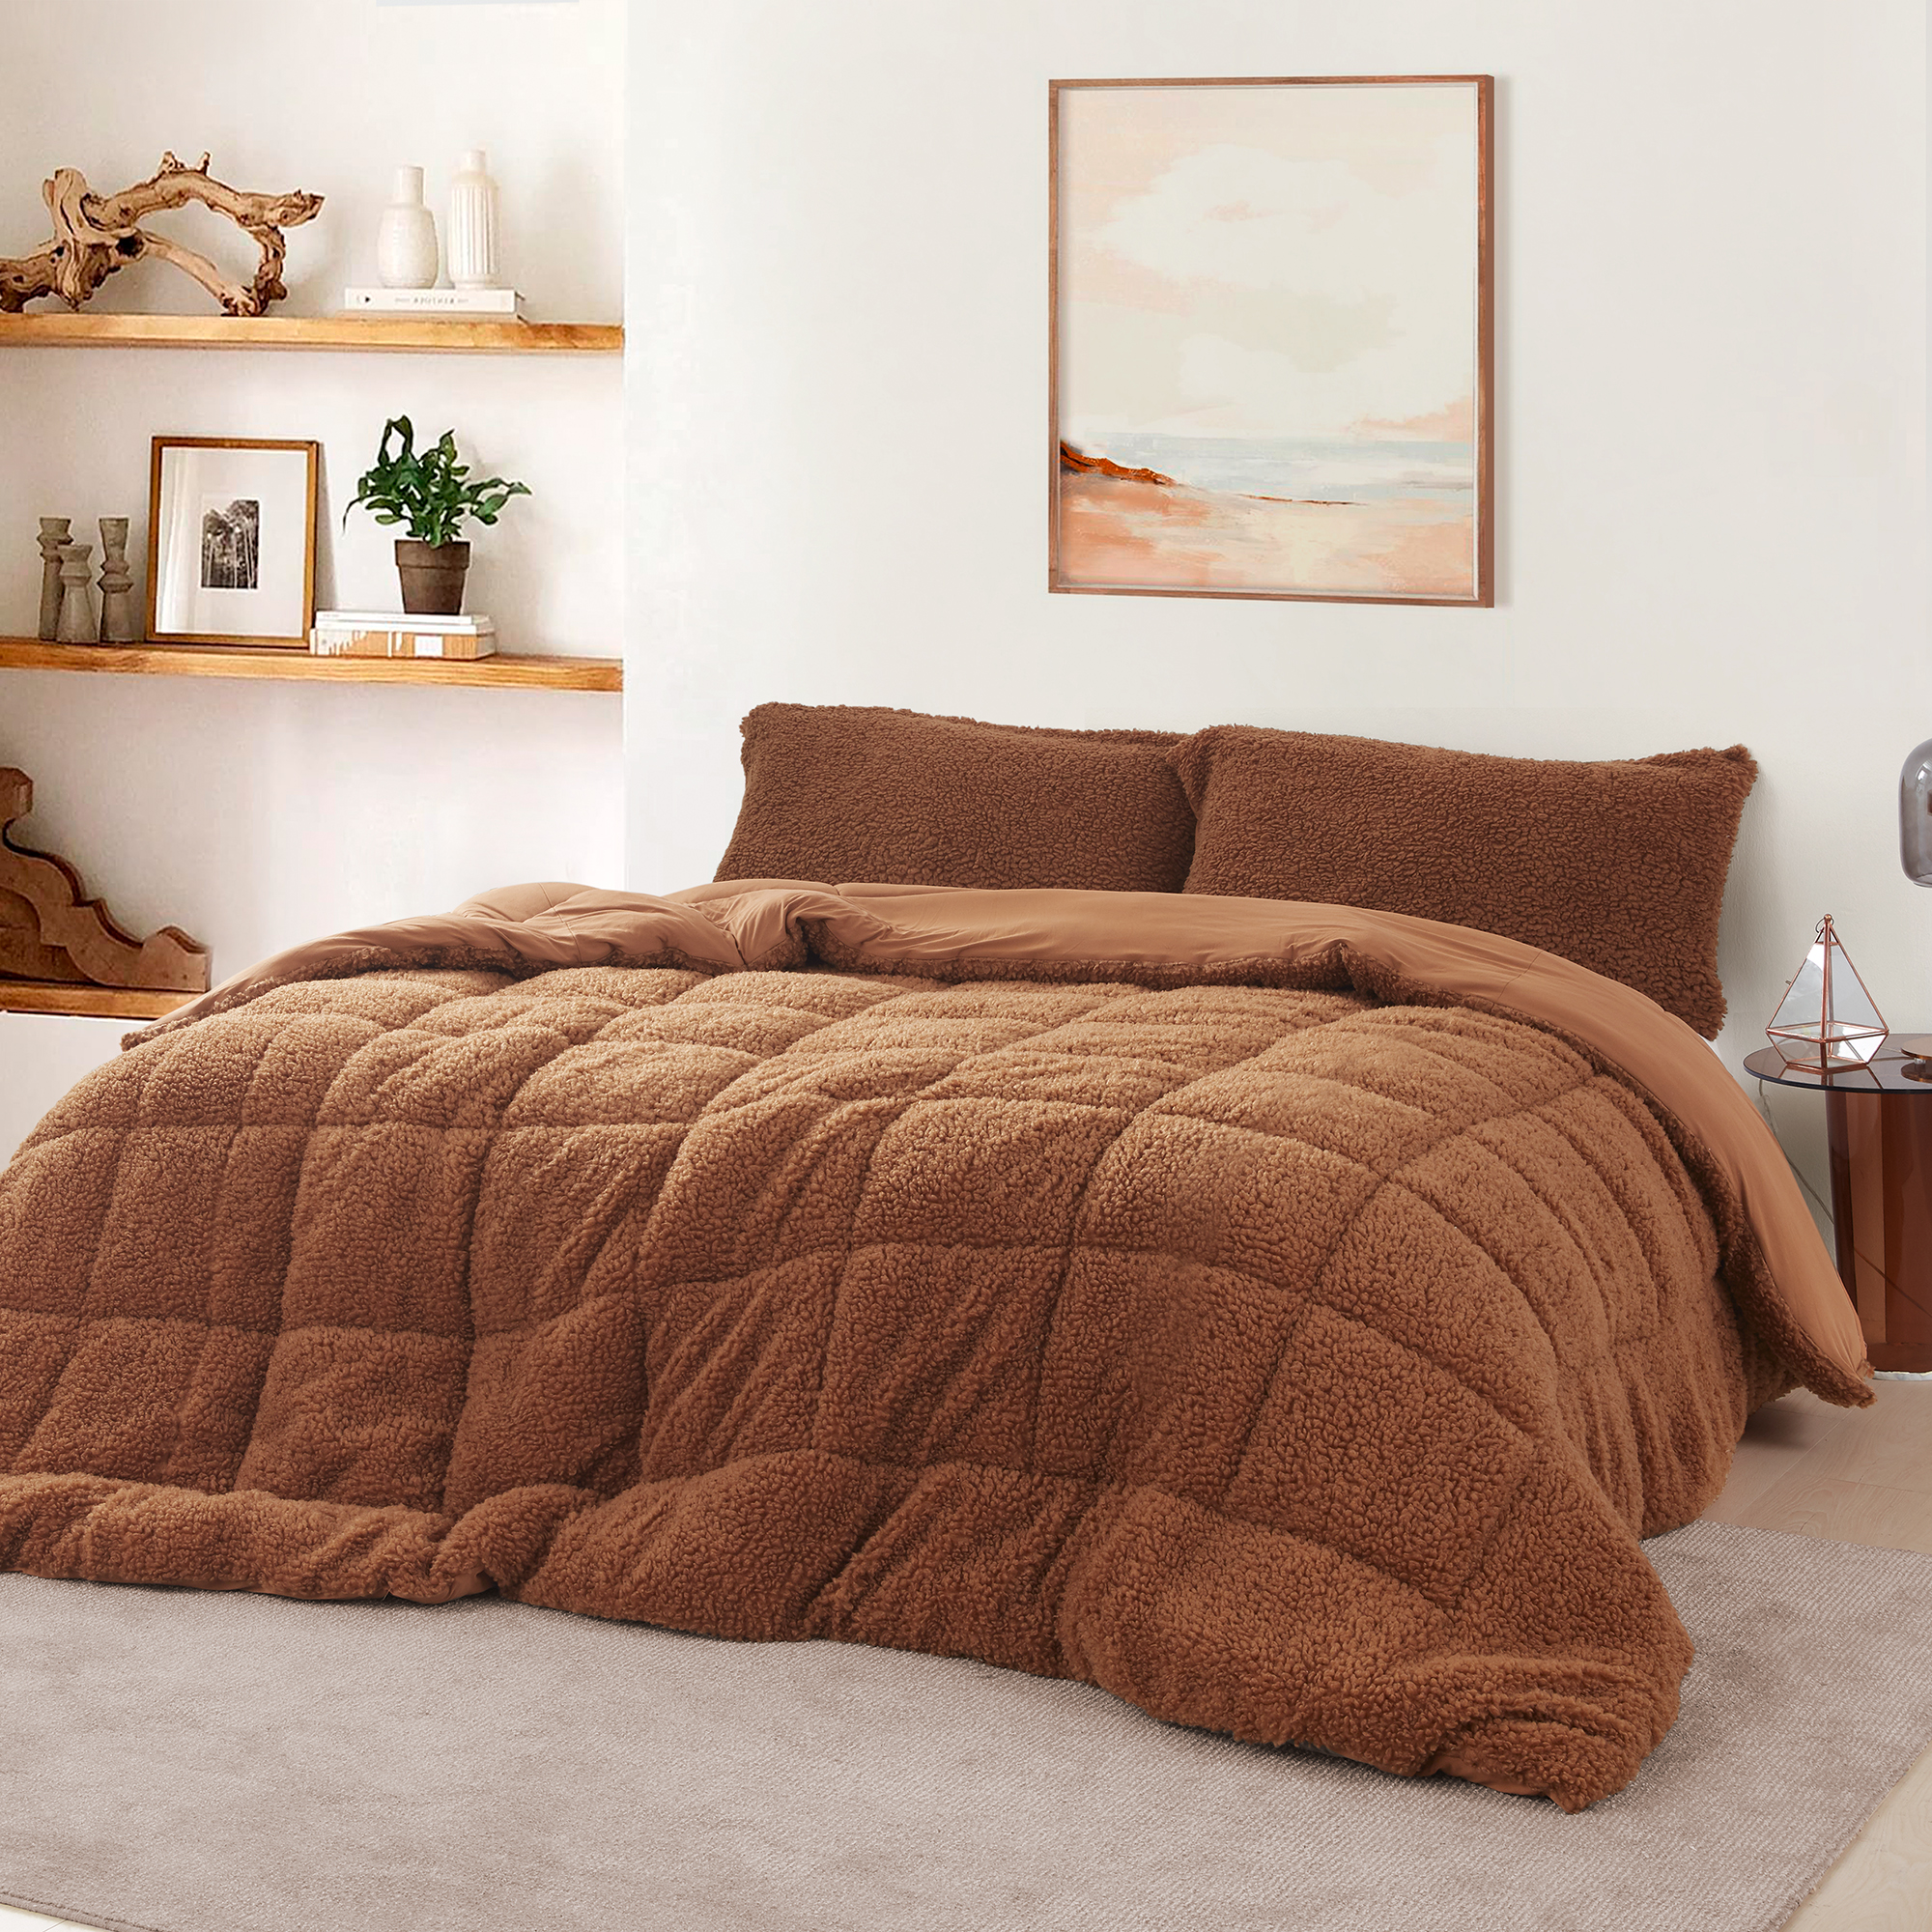 Cotton Candy - Coma Inducer® Full Comforter - Root Beer